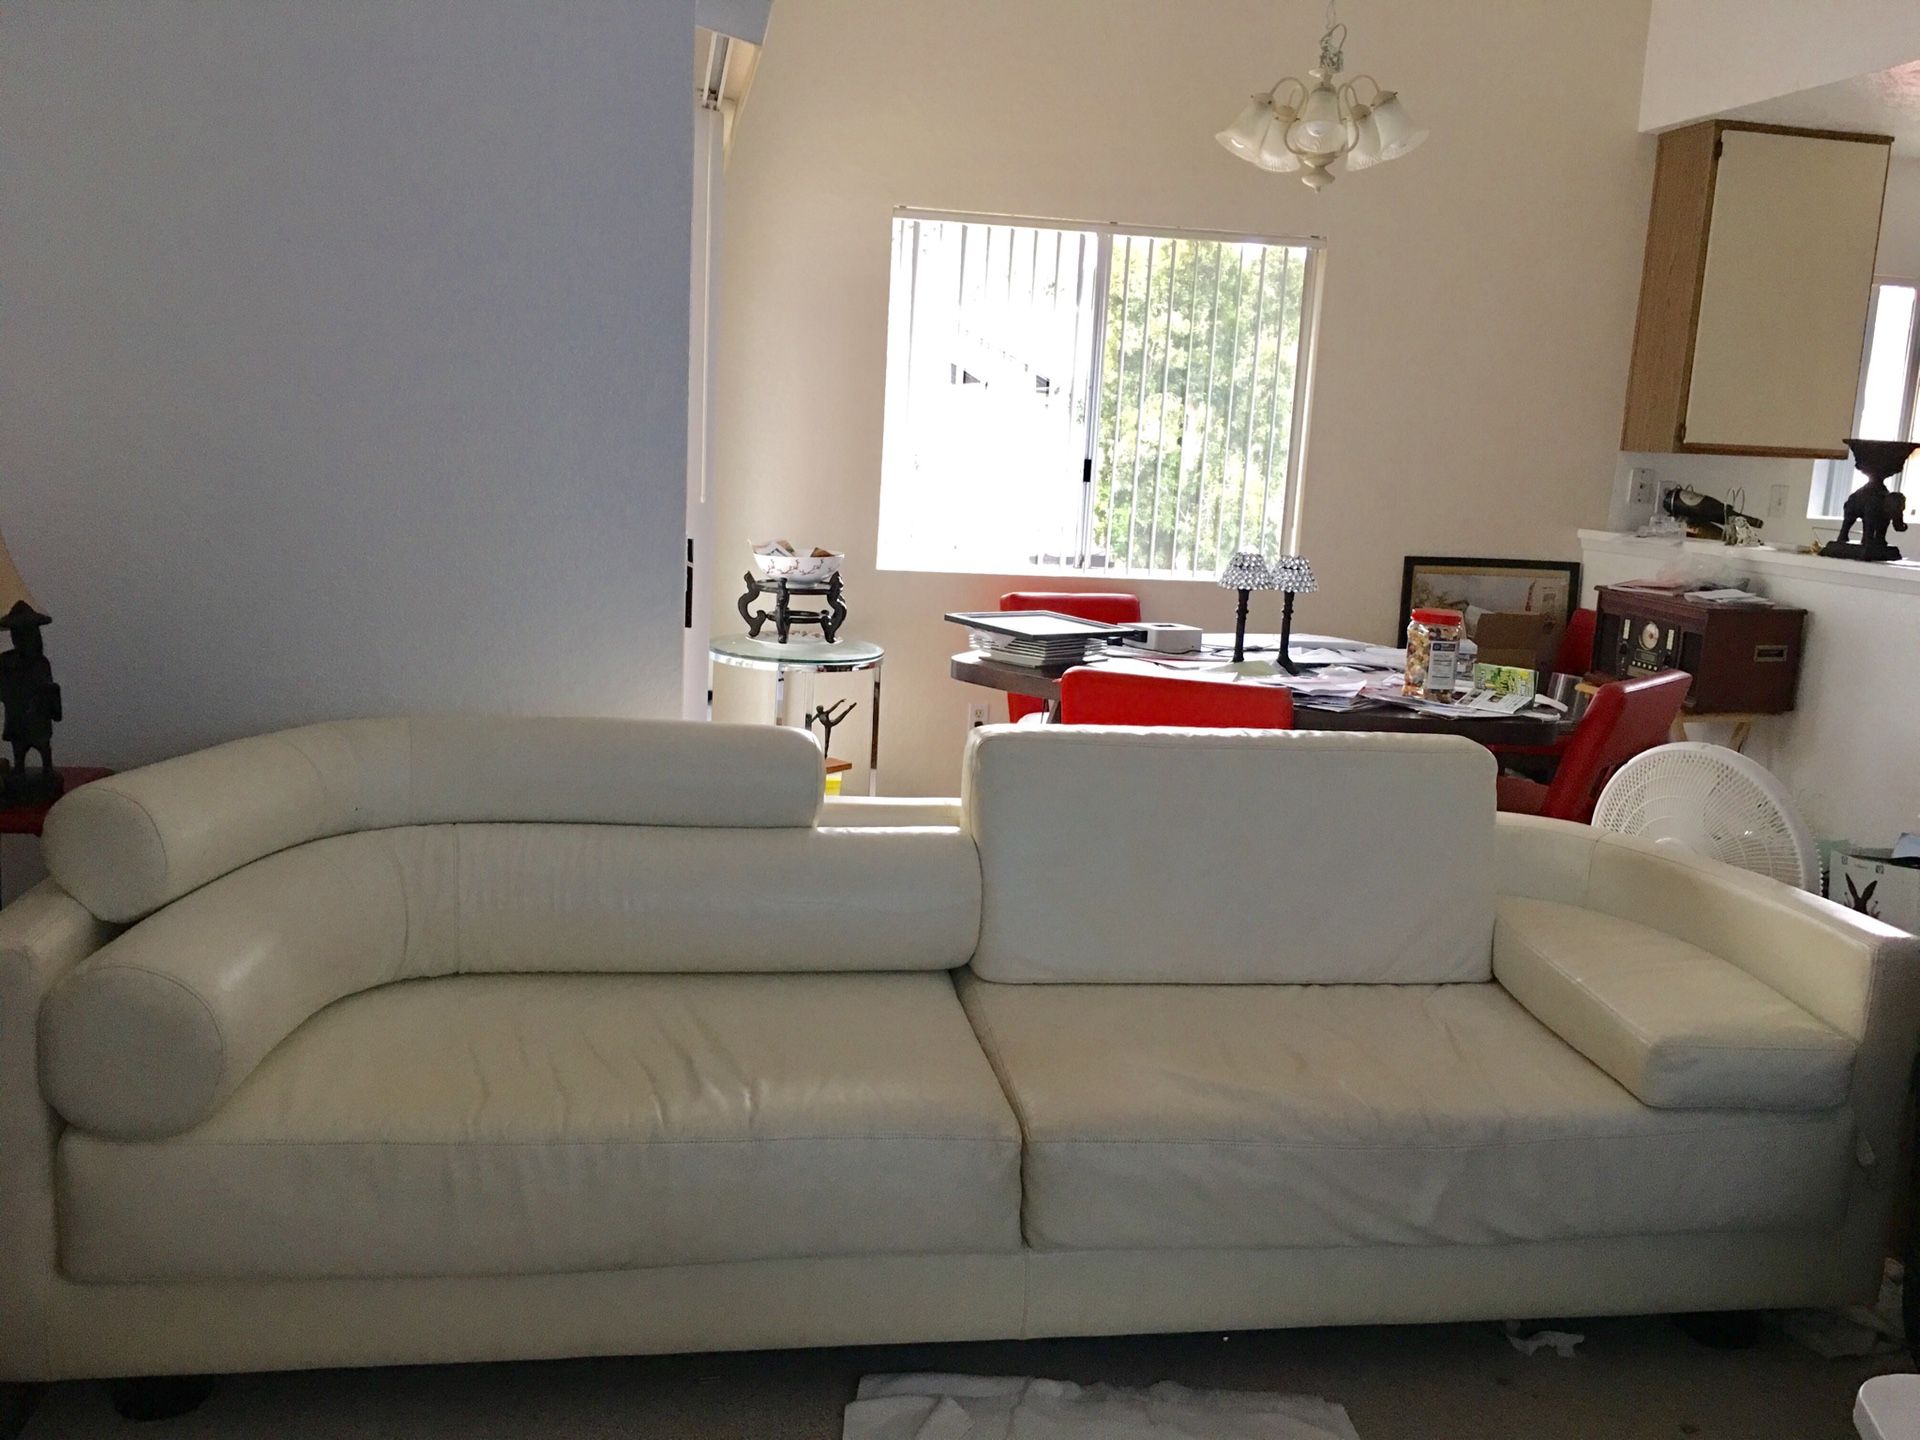 Beautiful leather Sofa very clean no pets in home